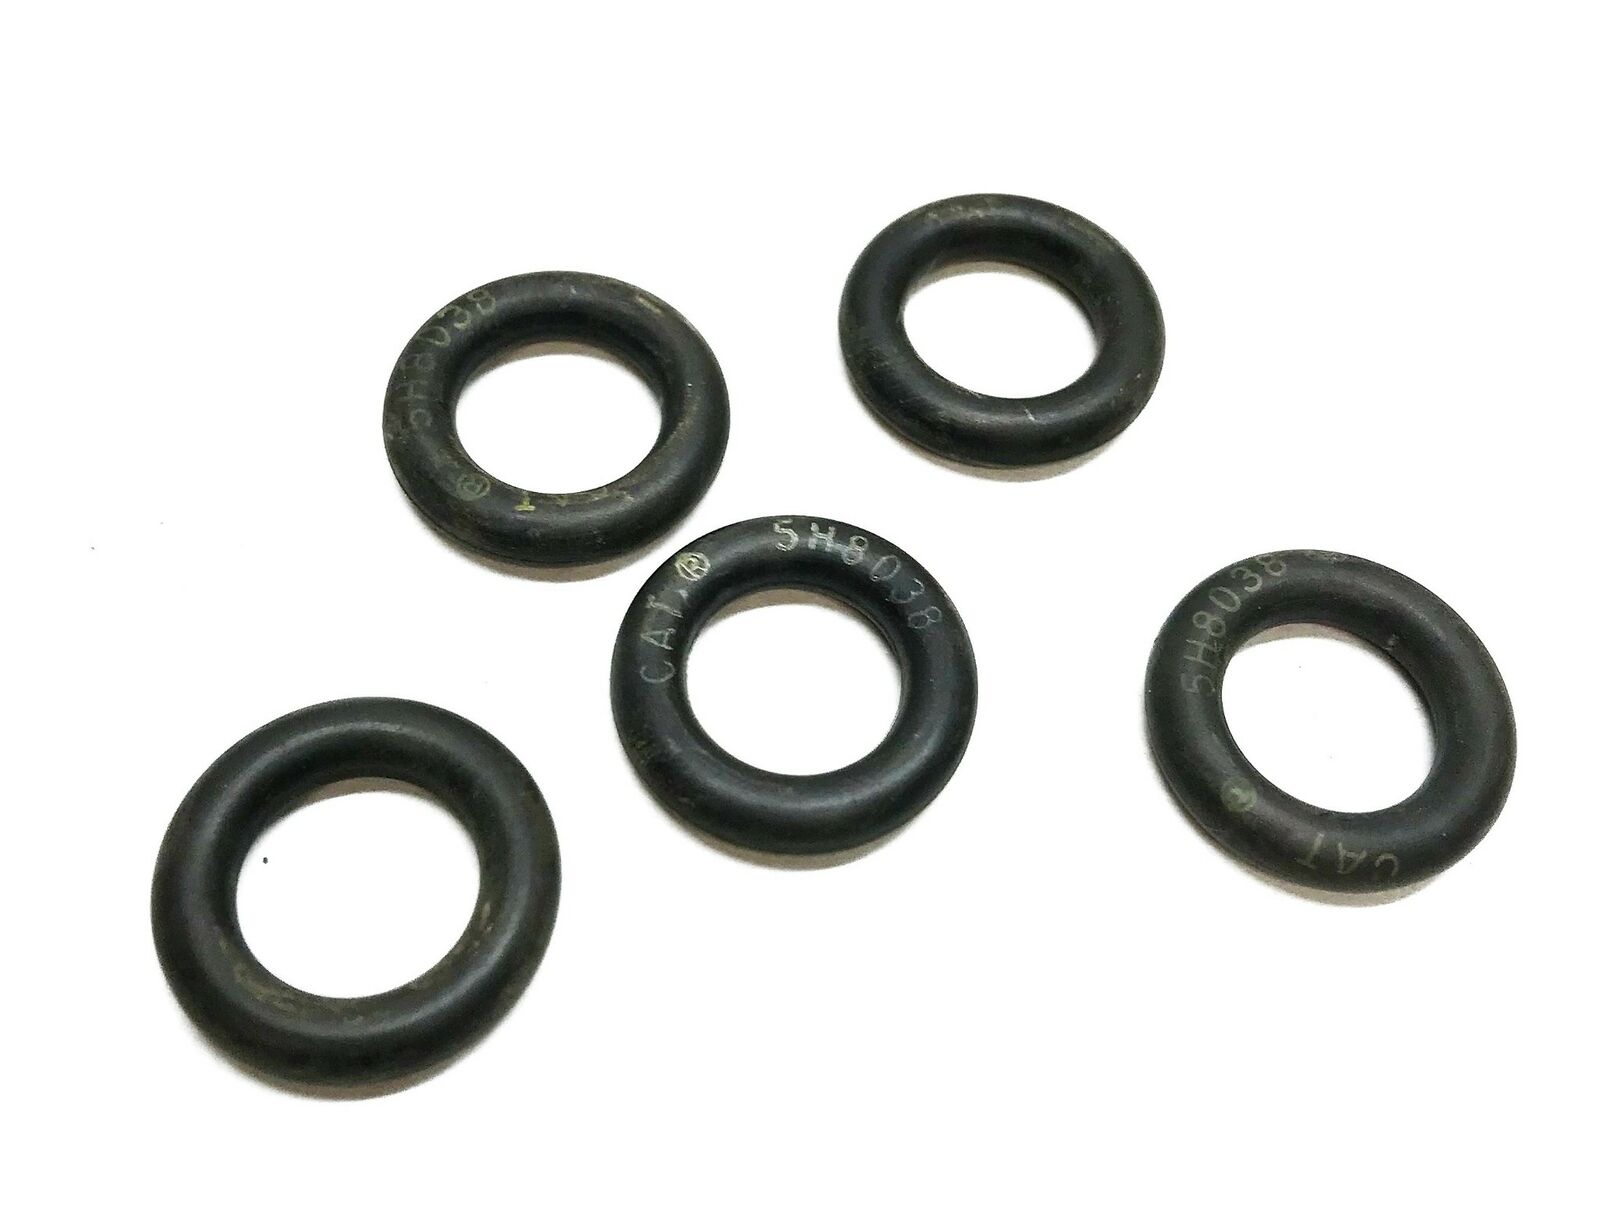 Caterpillar CAT OEM O-Ring Seal of 5H-8038 Lot 5 ☆ very popular Shipping included NOS